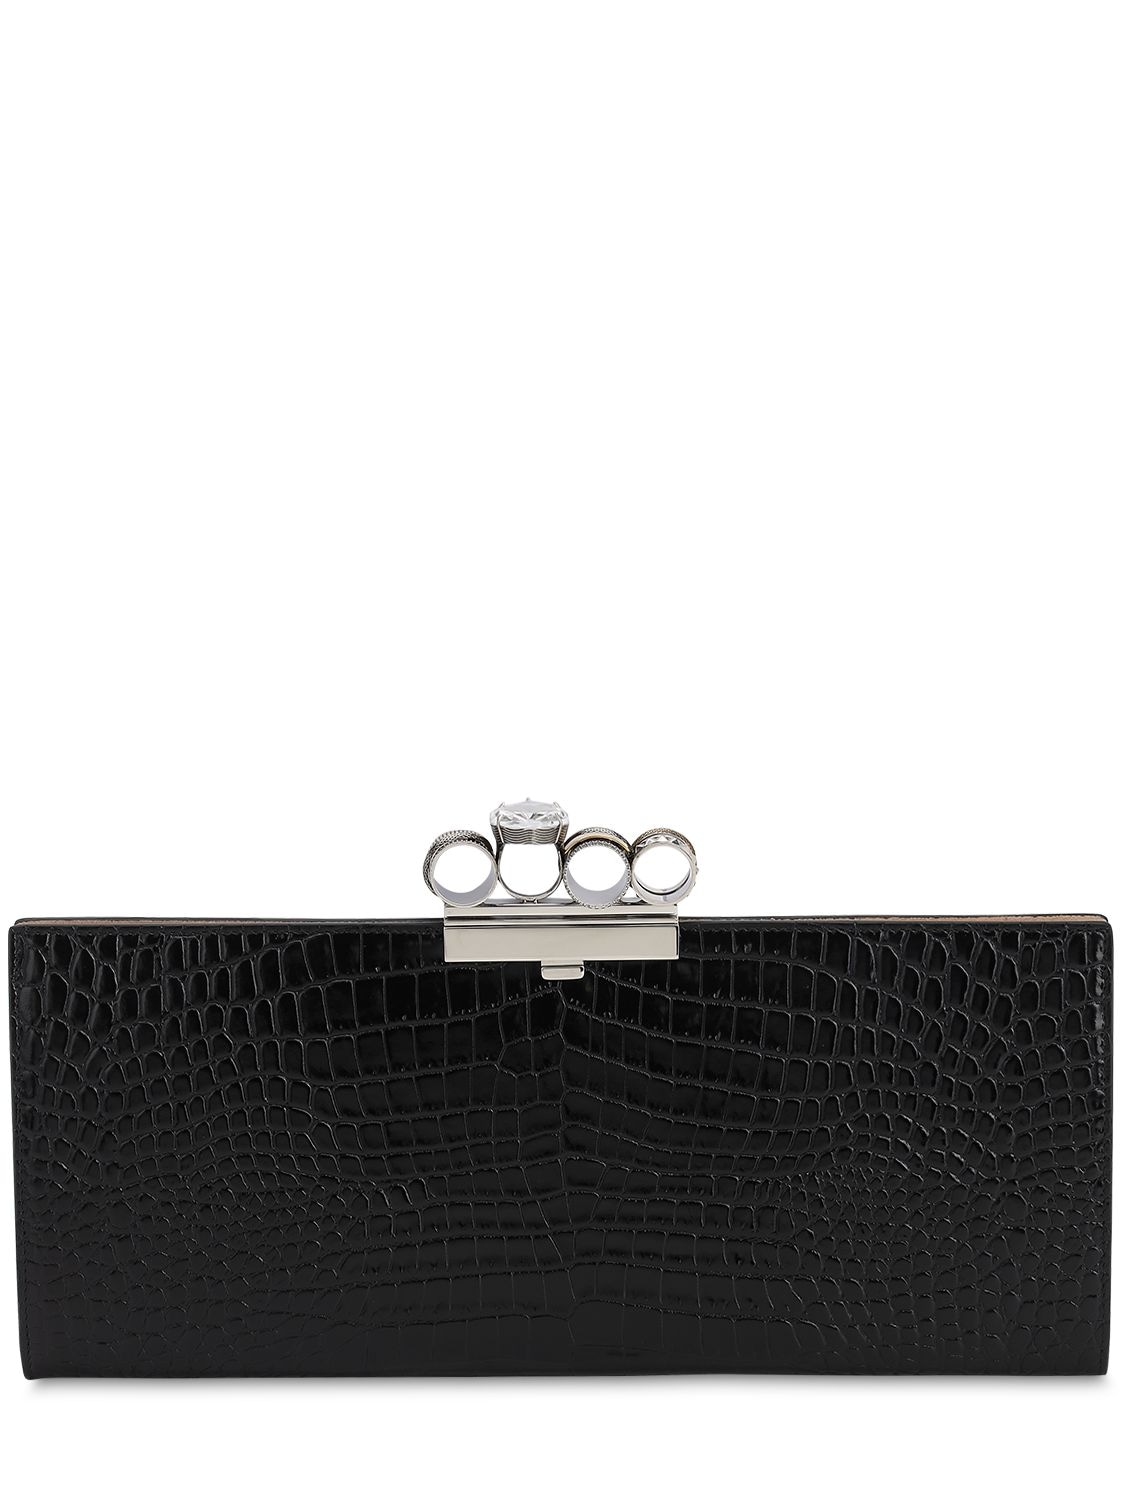 ALEXANDER MCQUEEN FOUR RING CROC EMBOSSED LEATHER CLUTCH,70IRL6007-MTAWMA2